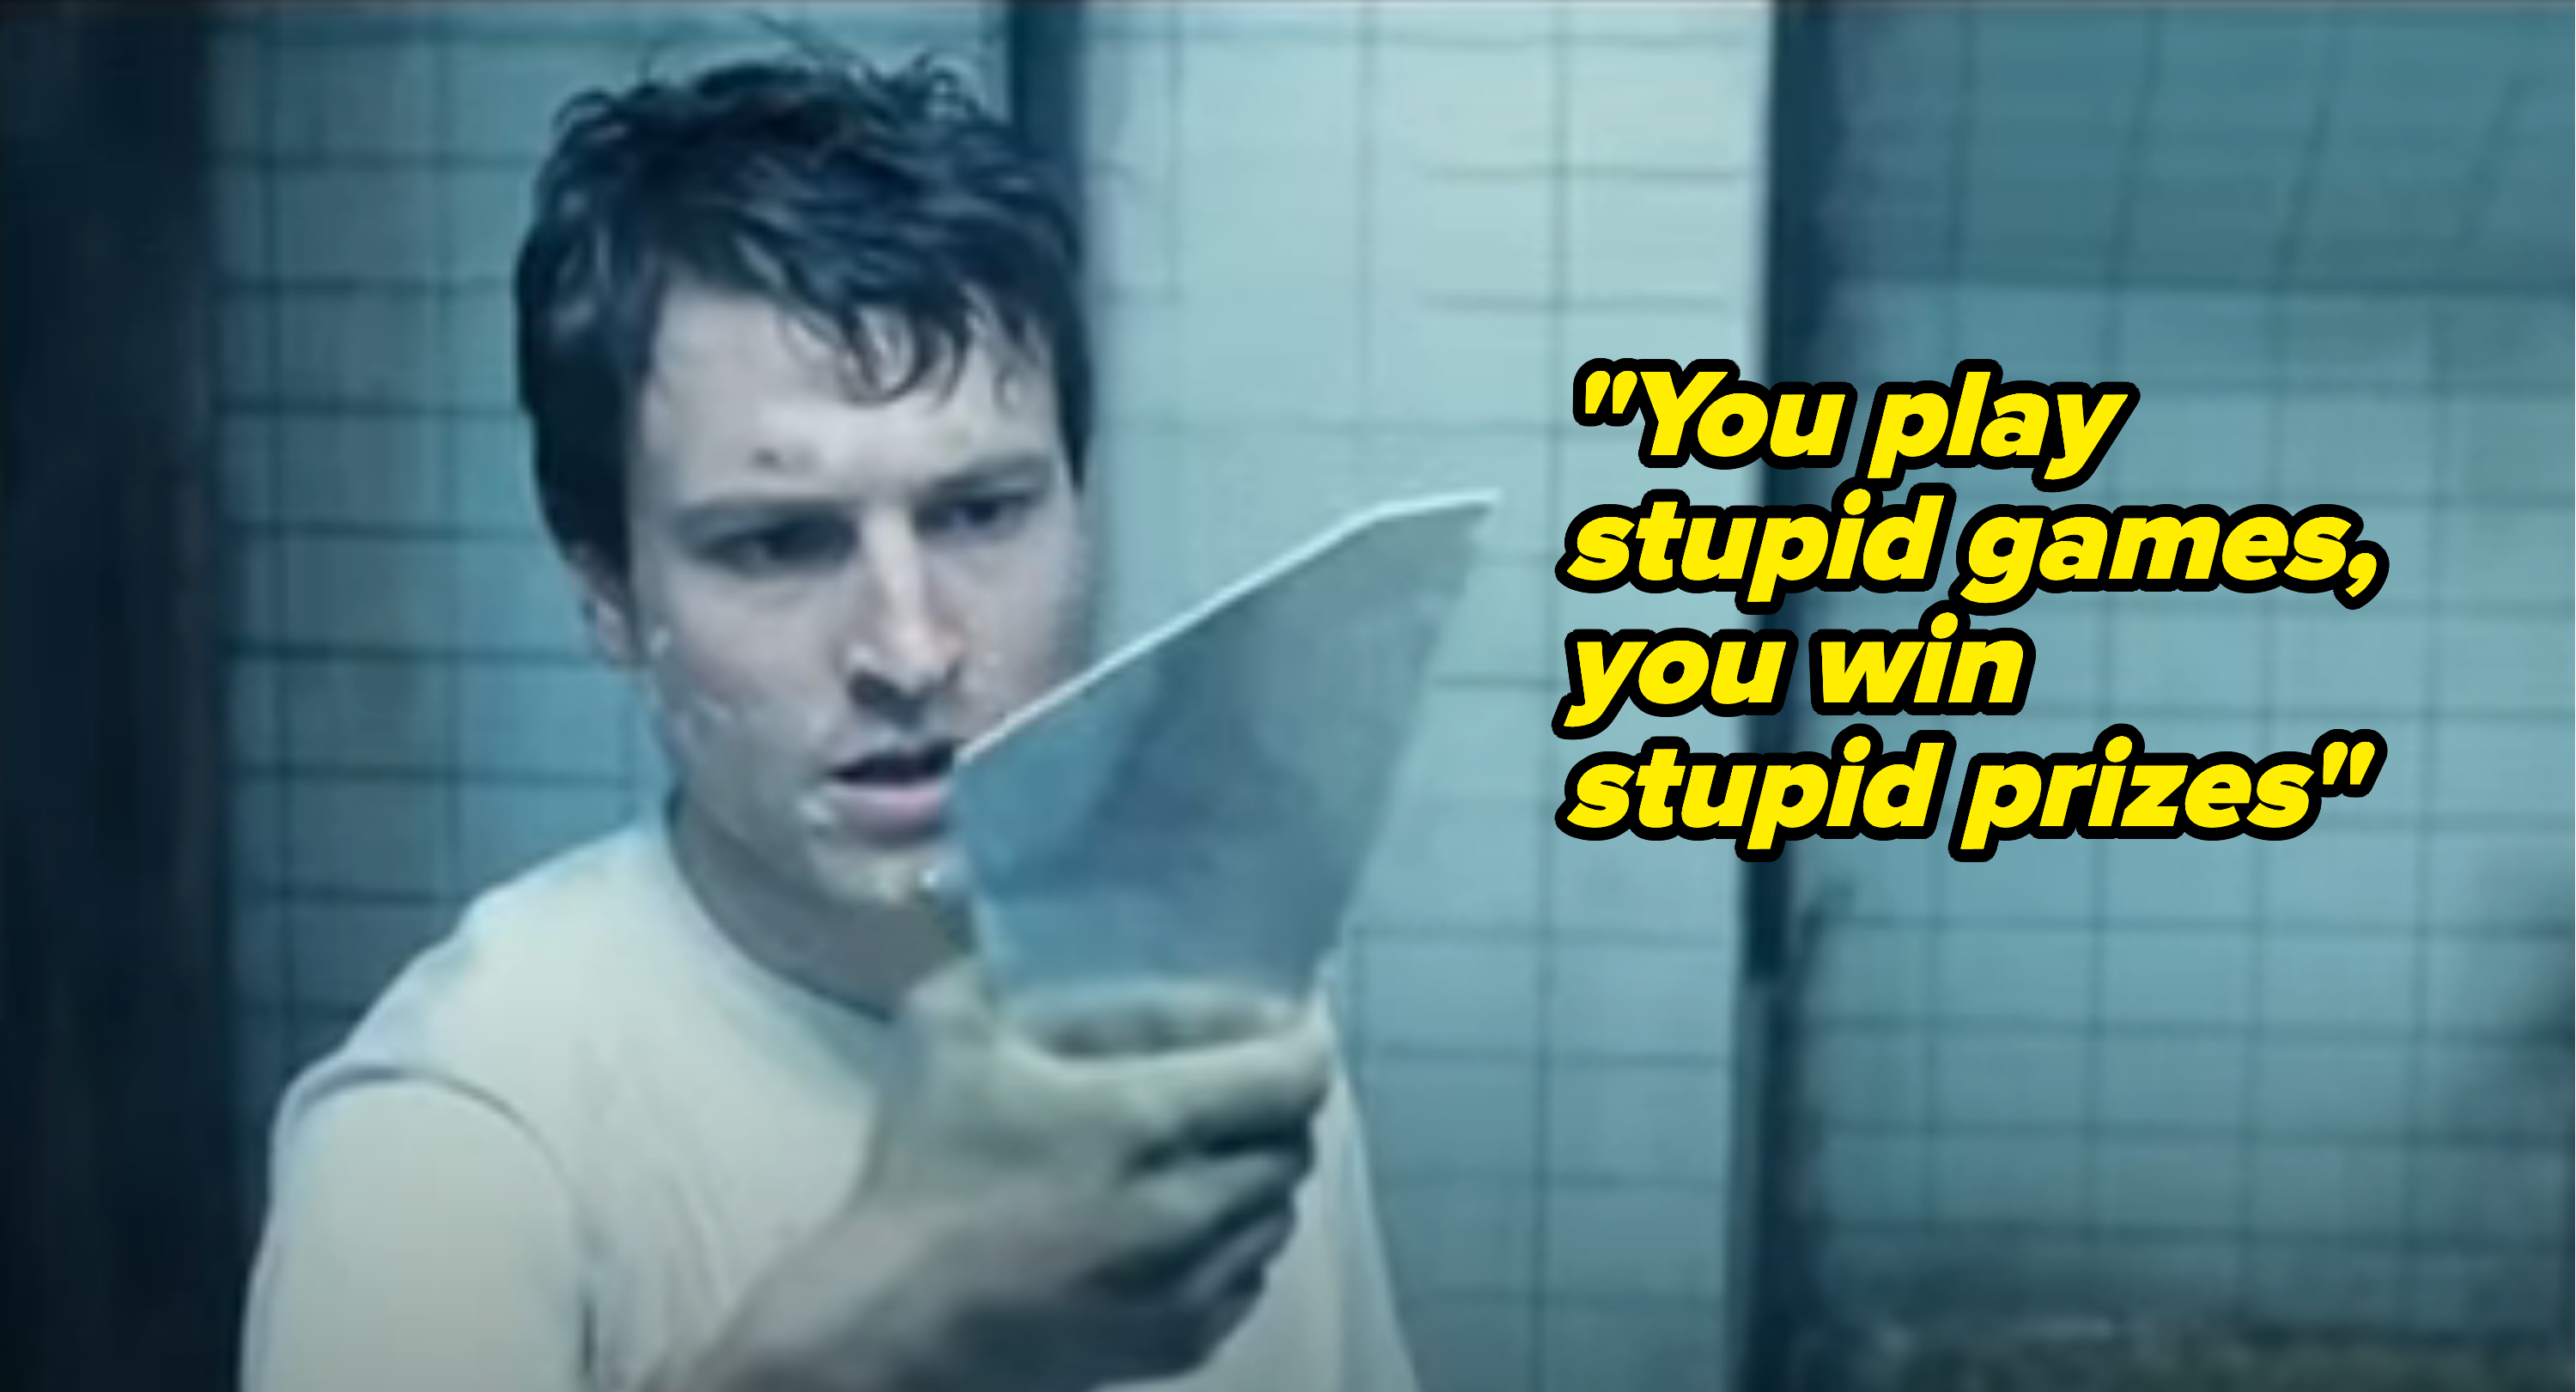 actor holding up mirror shard in saw with taylor lyrics &#x27;you play stupid games you win stupid prizes&#x27;